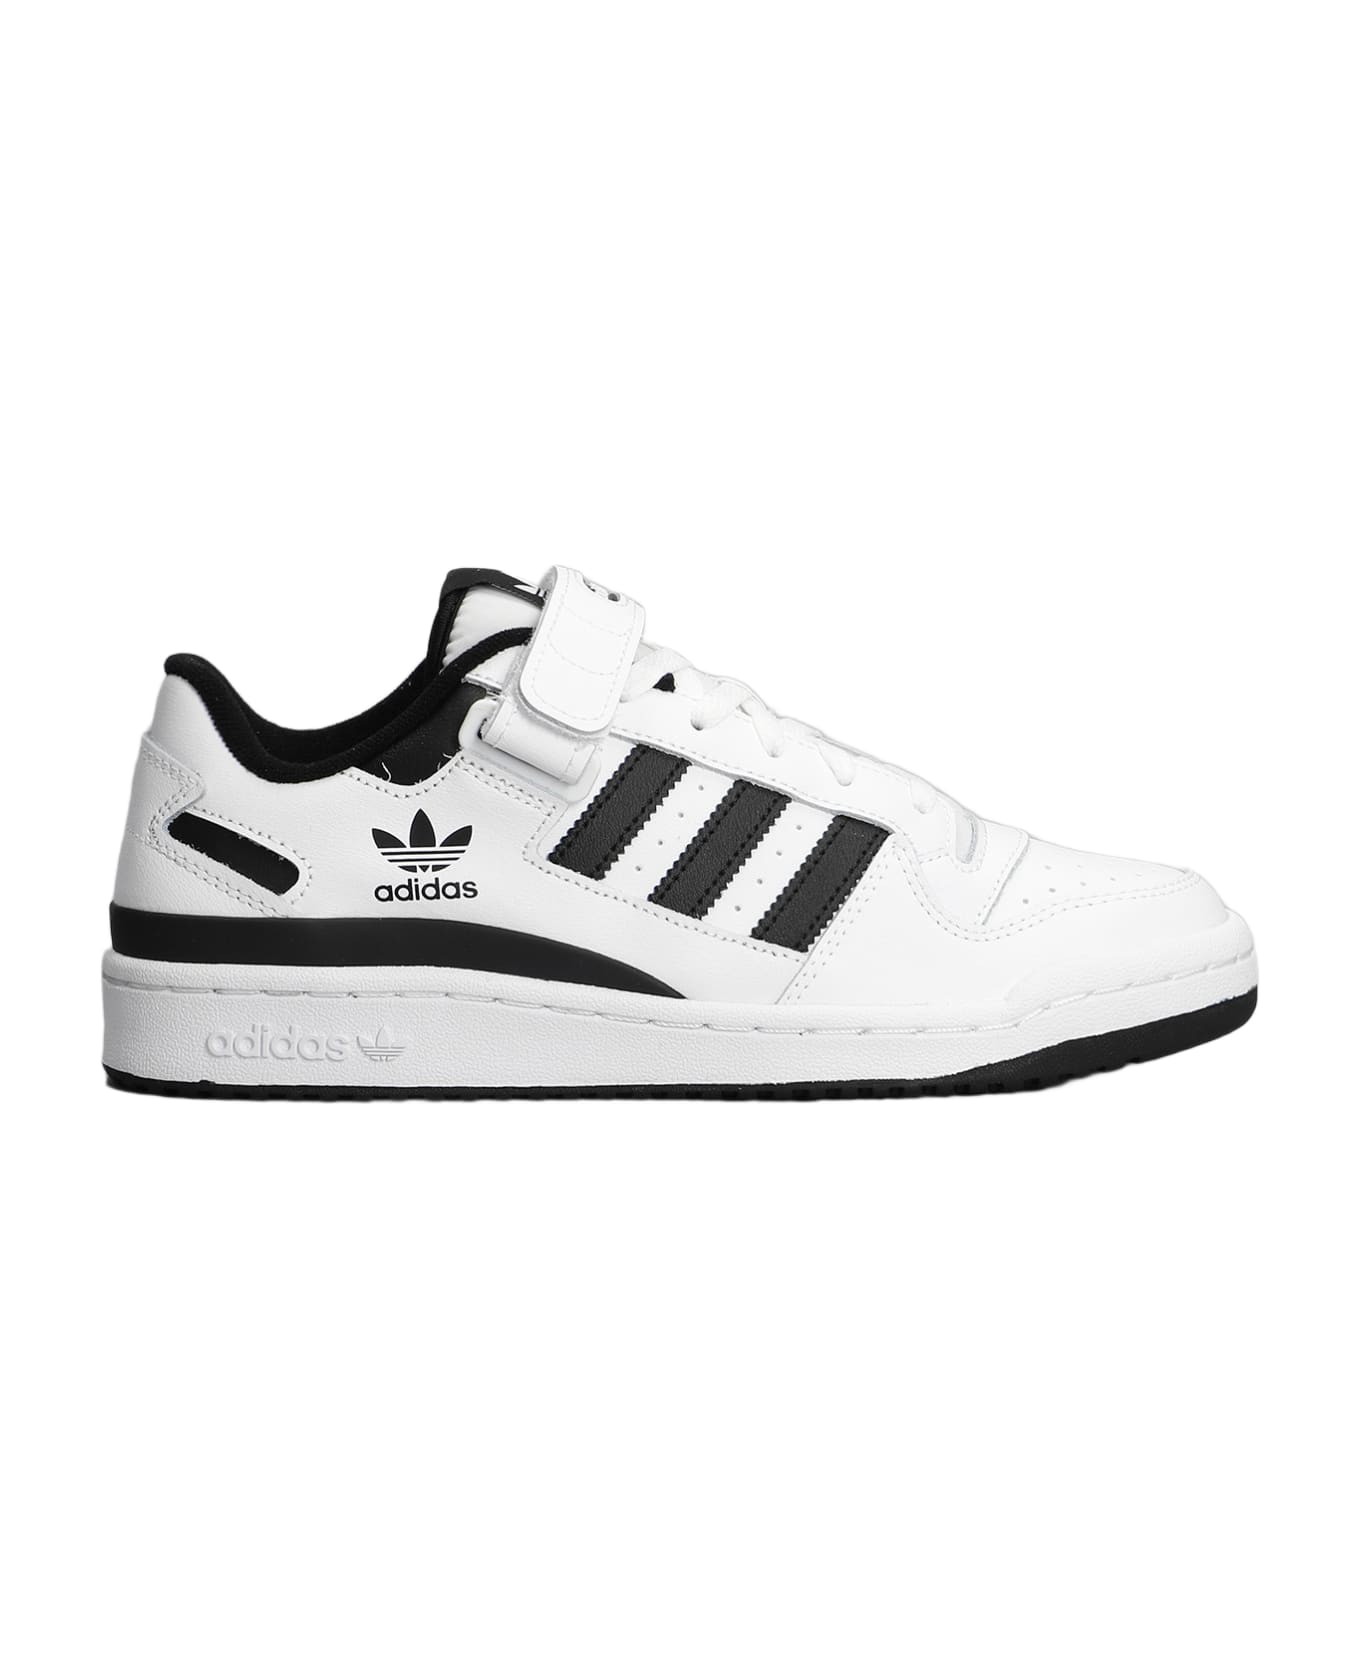 Adidas Originals Forum Low Sneakers In White Leather - FTWWHT/FTWWHT/CBLACK